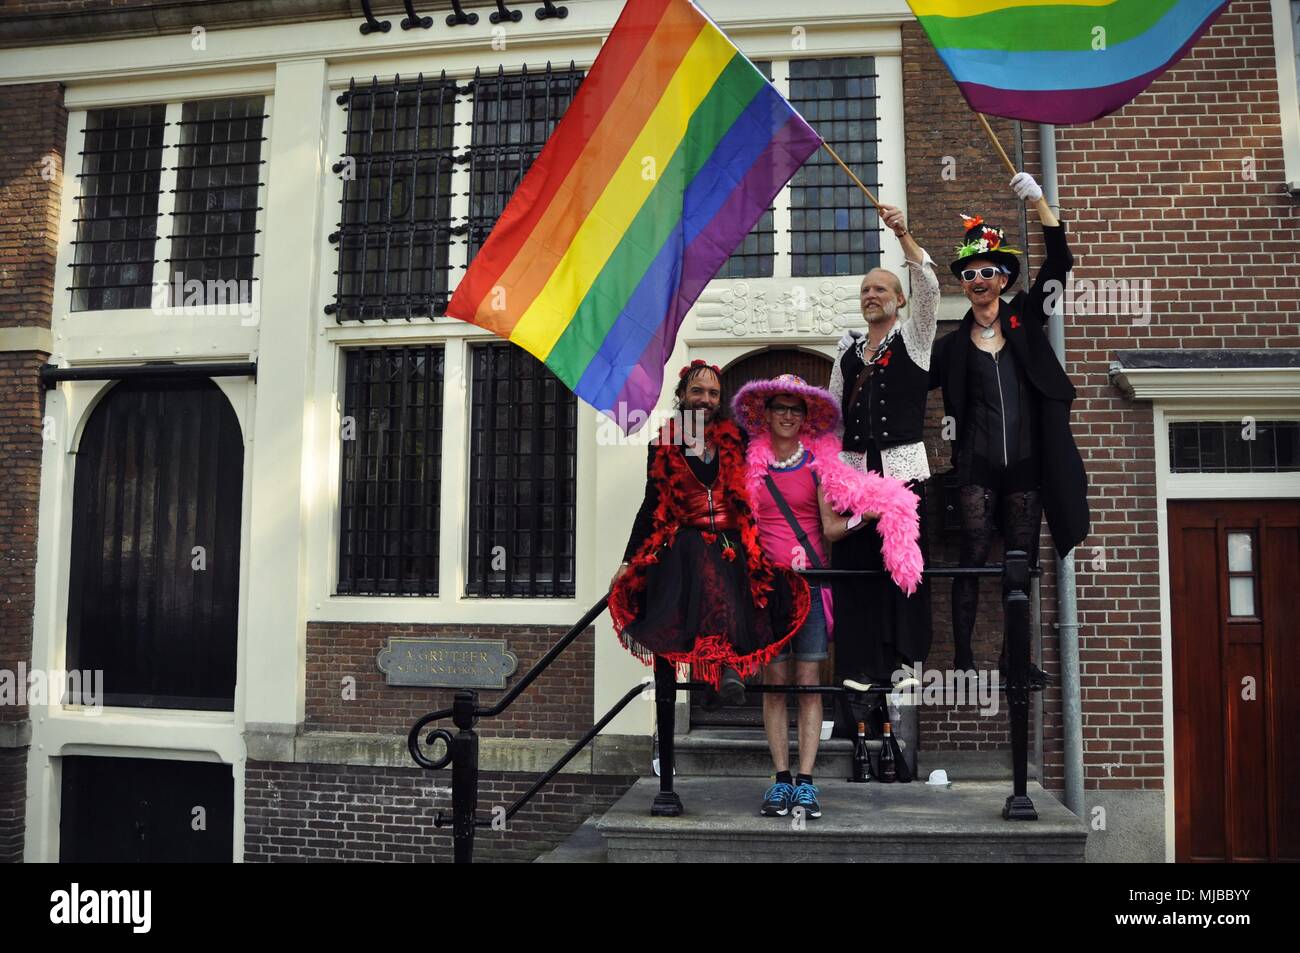 Amsterdam, Netherlands:  Four people in costumes standing on a balcony, waiving rainbow flags at the traditional Amsterdam gay pride event. Stock Photo